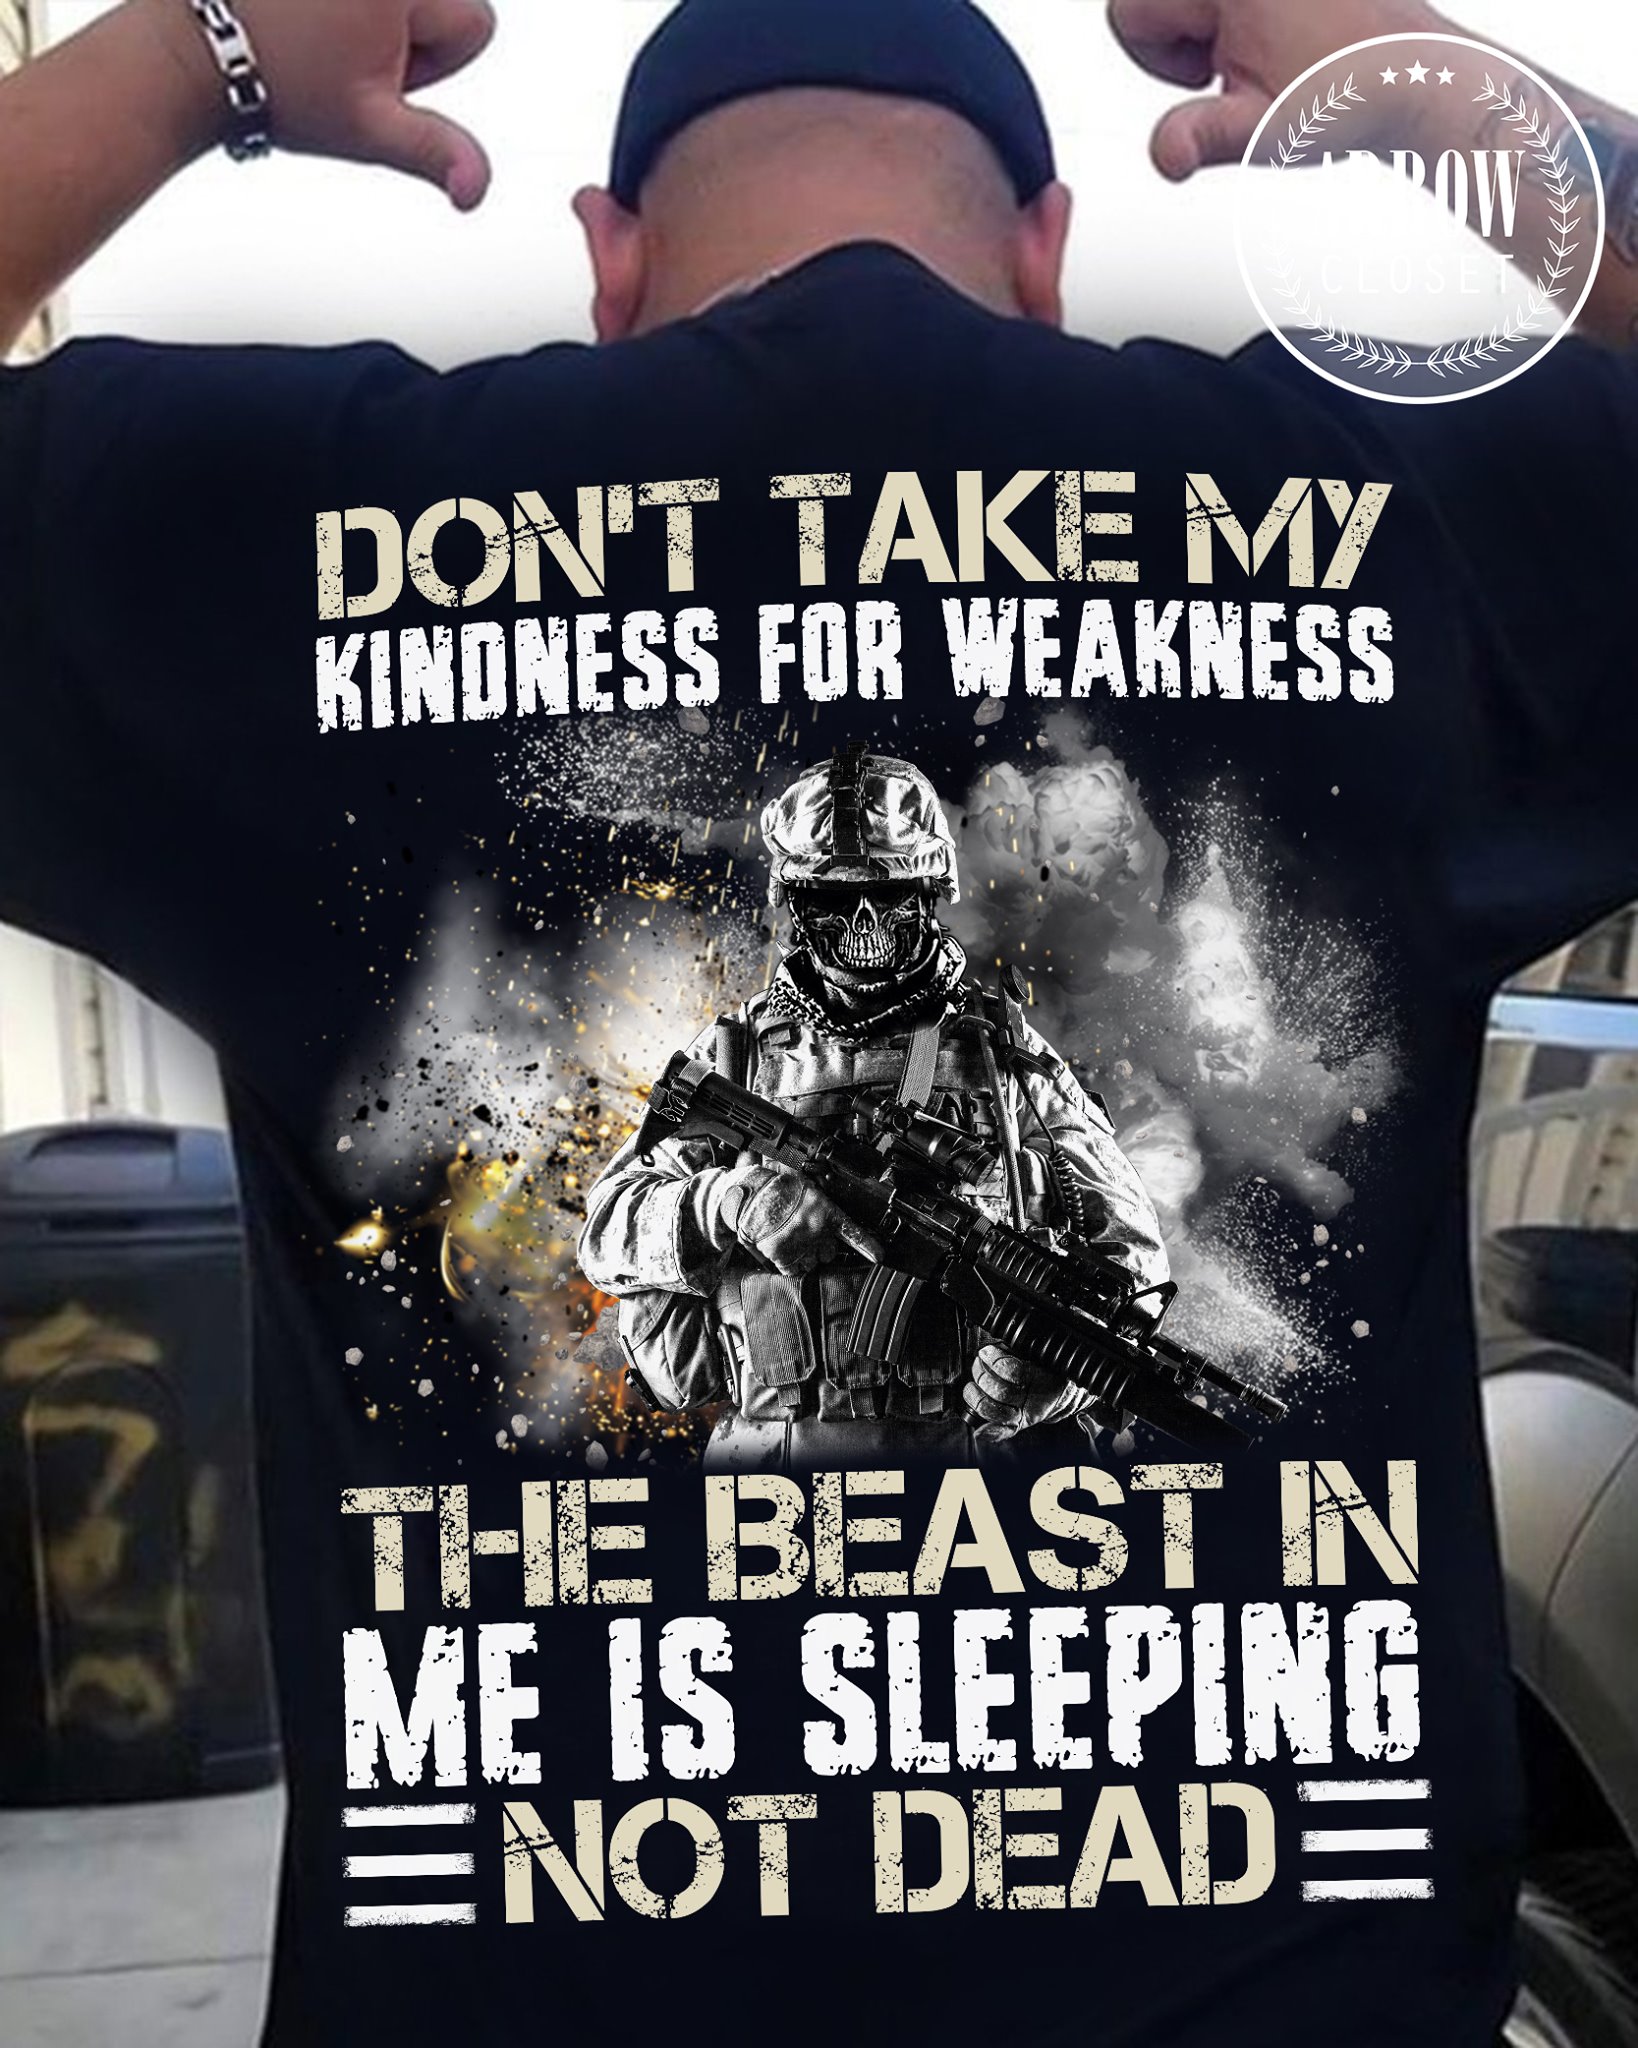 Don't take my kindness for weakness the best in me is sleeping